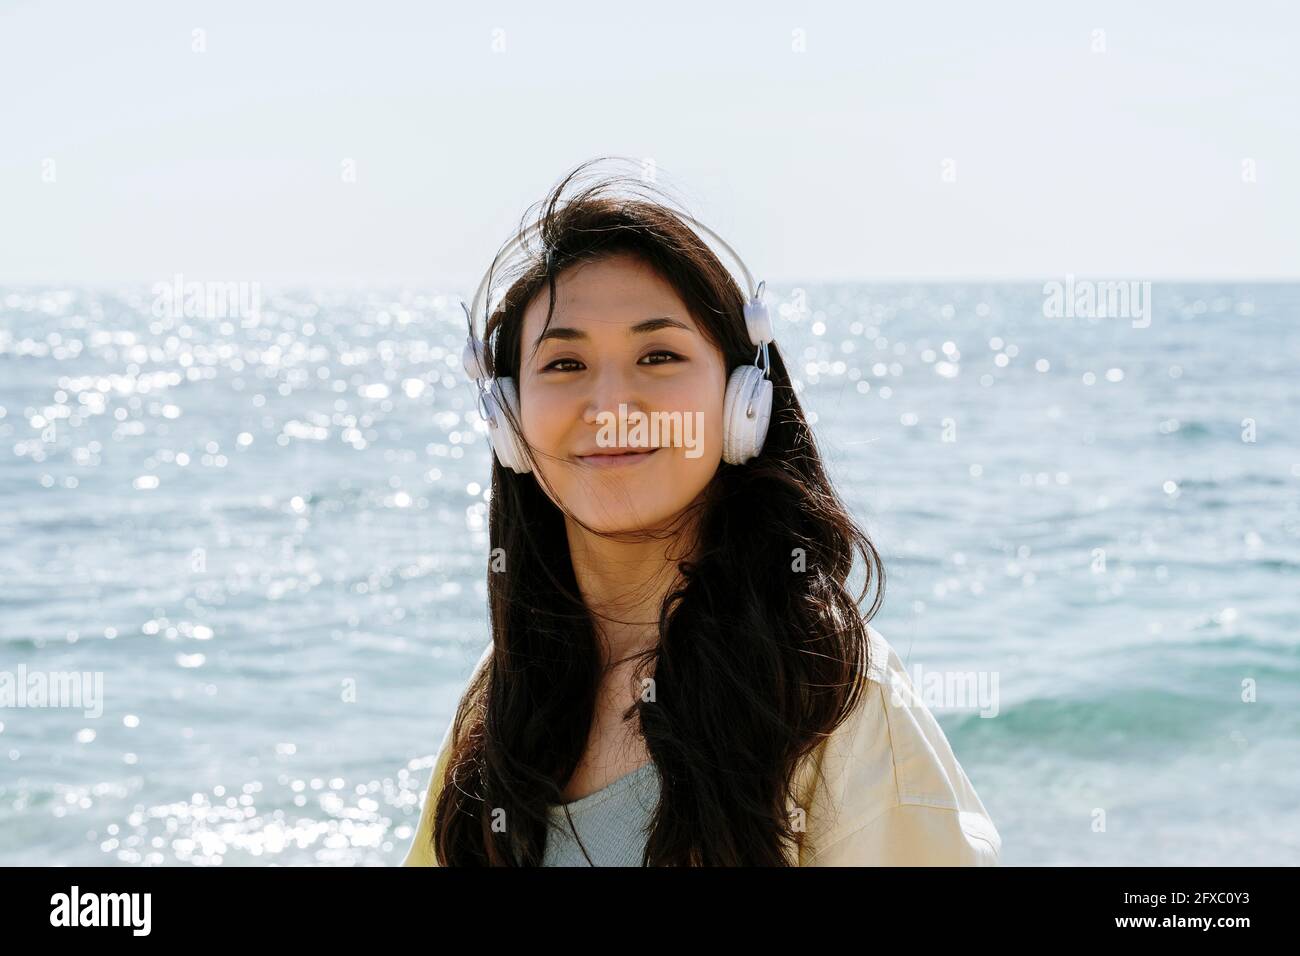 Beautiful woman with in-ear headphones standing on beach during sunny day Stock Photo